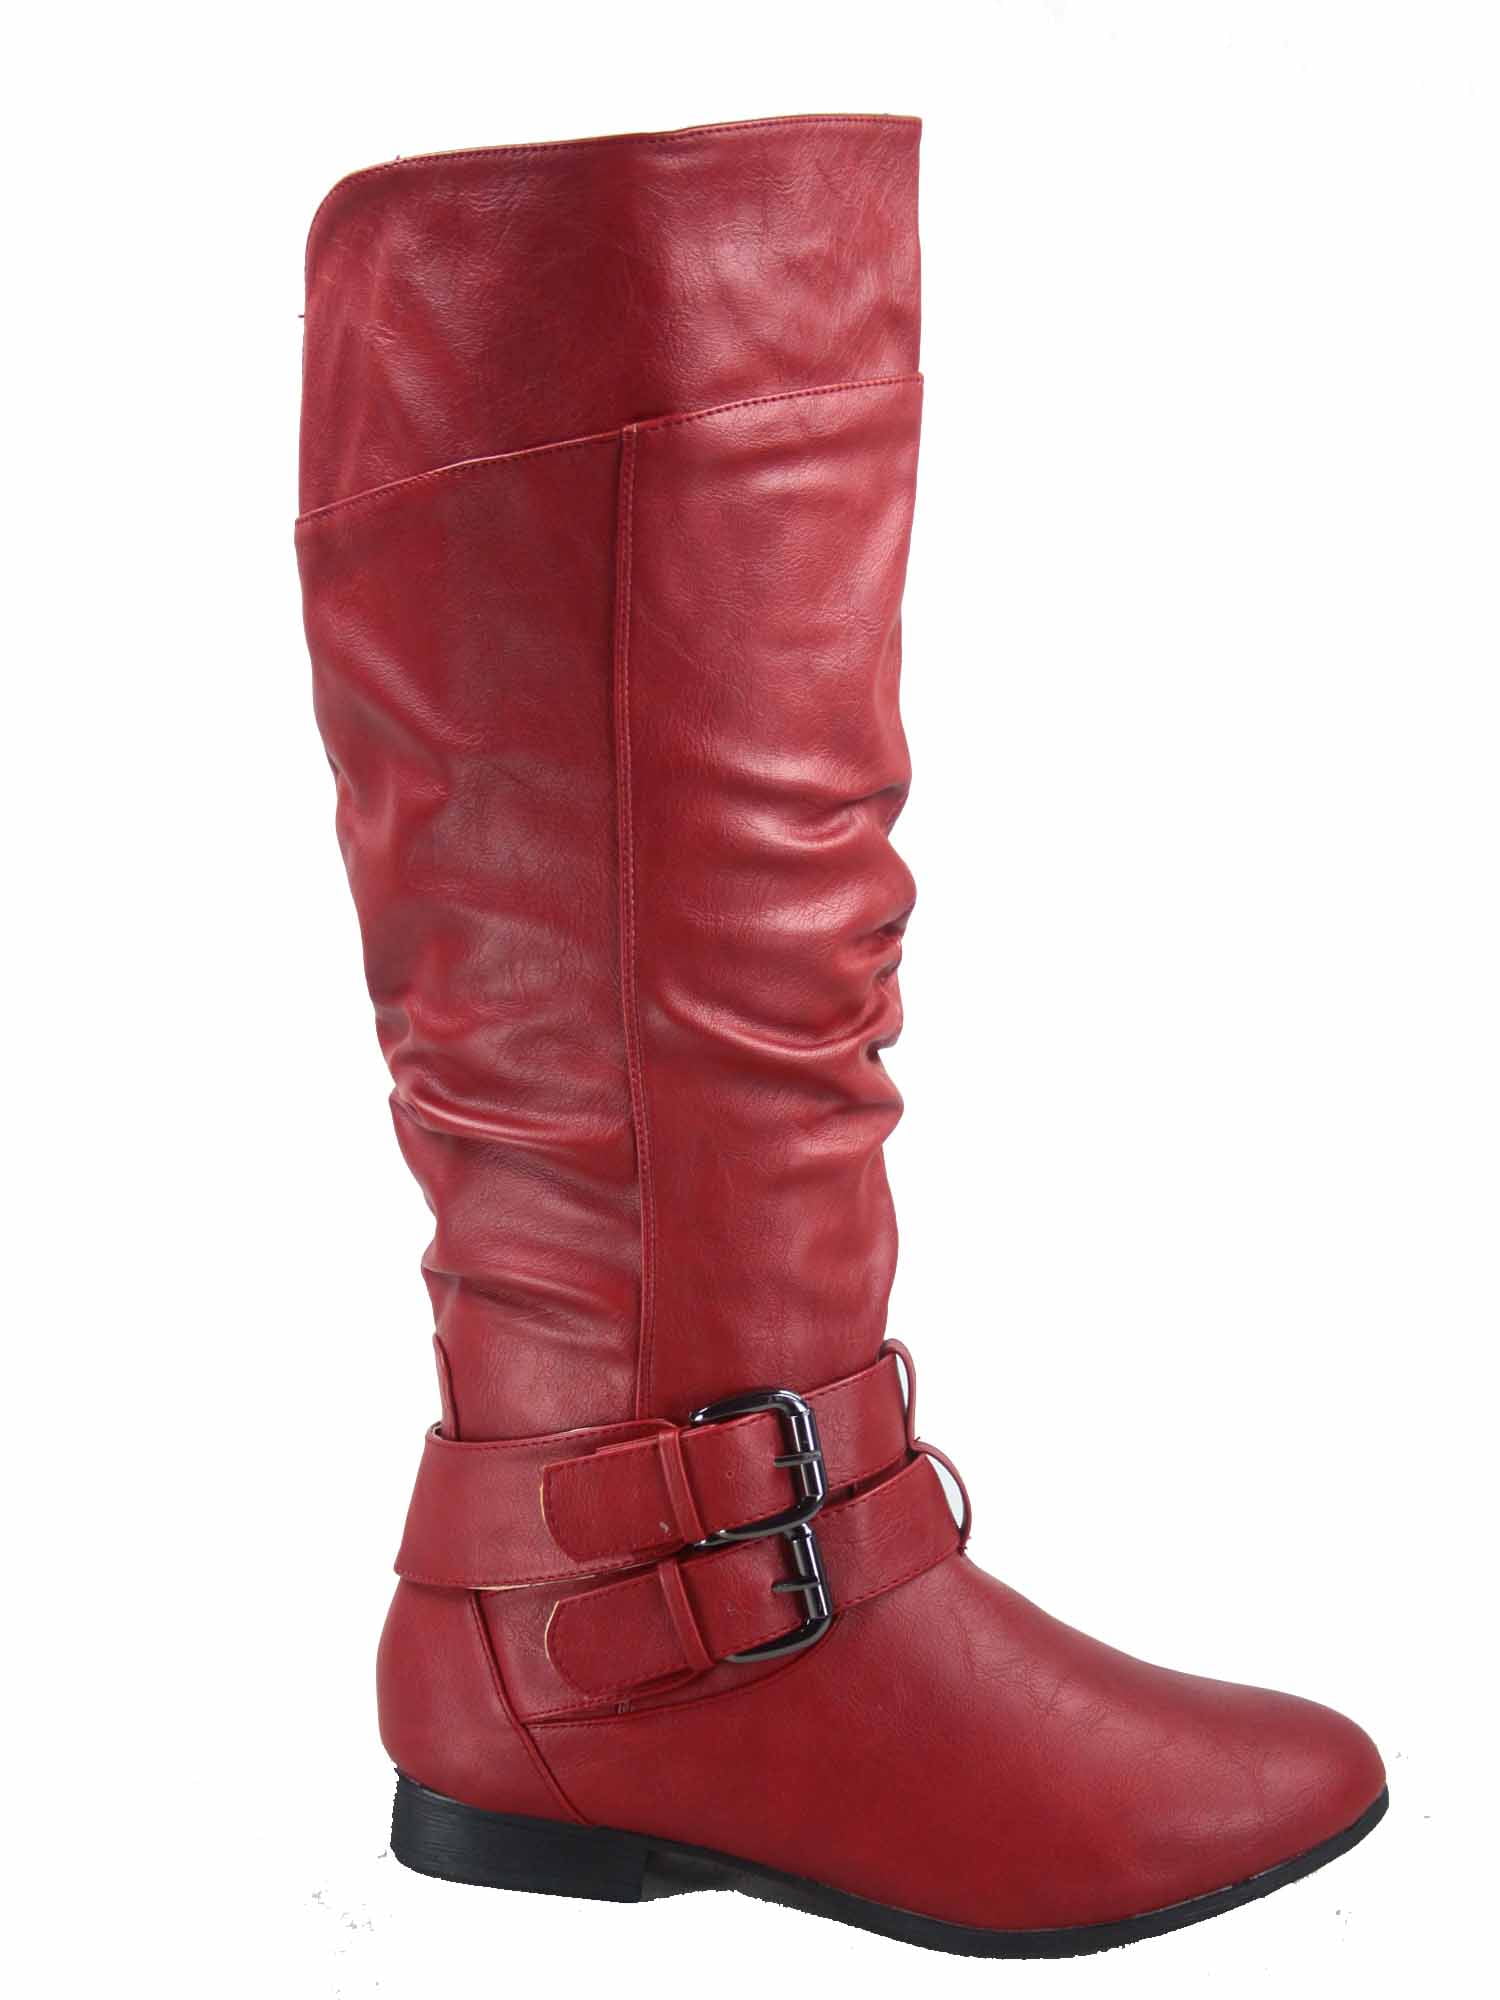 Womens Stylish Cool Studded Round Toe Buckle Strap Side Zipper Dress Low Heels Knee High Tall Boots Shoes 